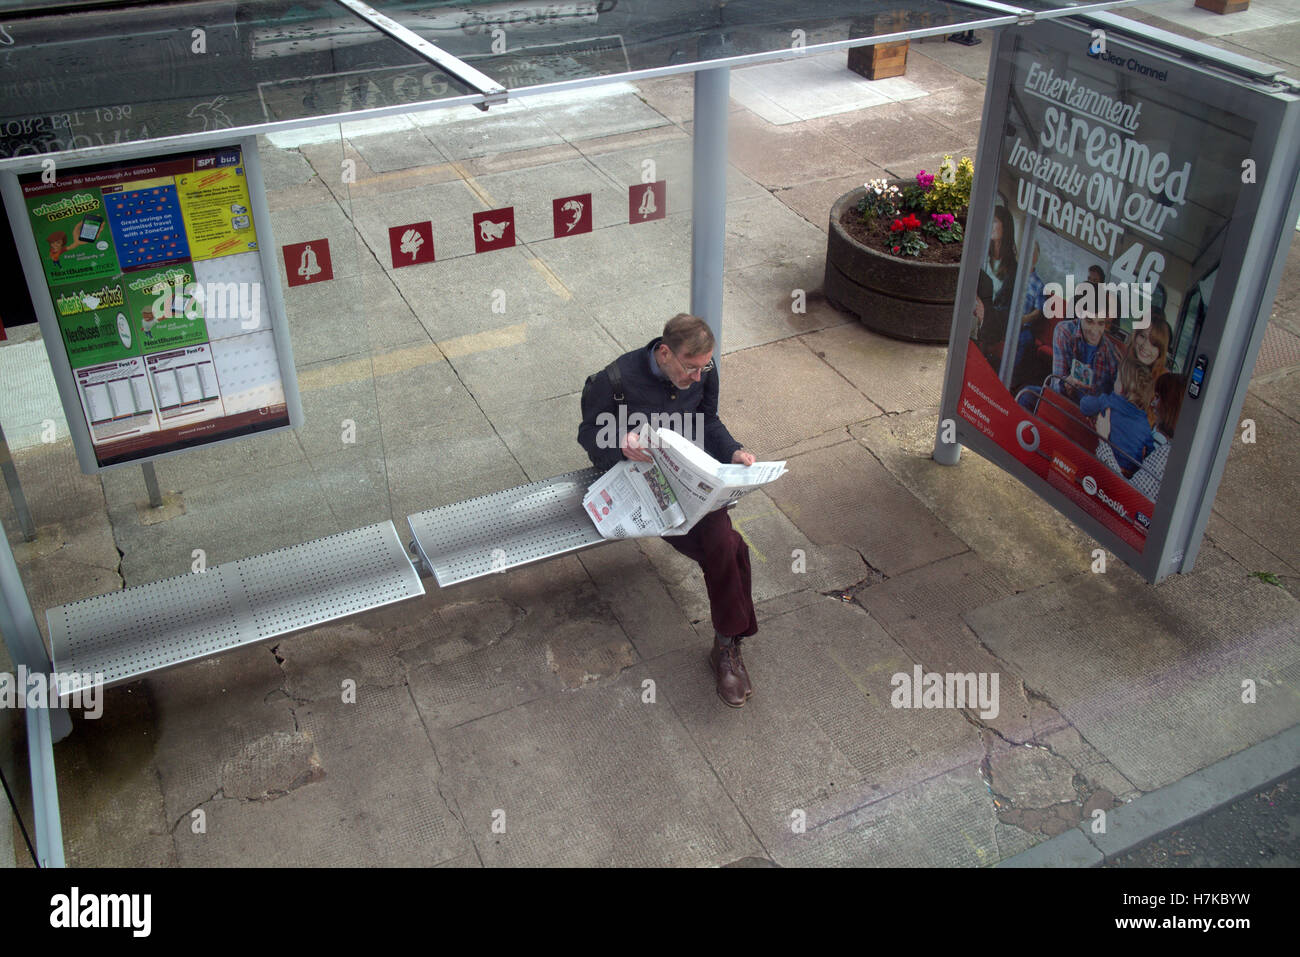 man at bus stop reading herald newspaper with adverts Stock Photo